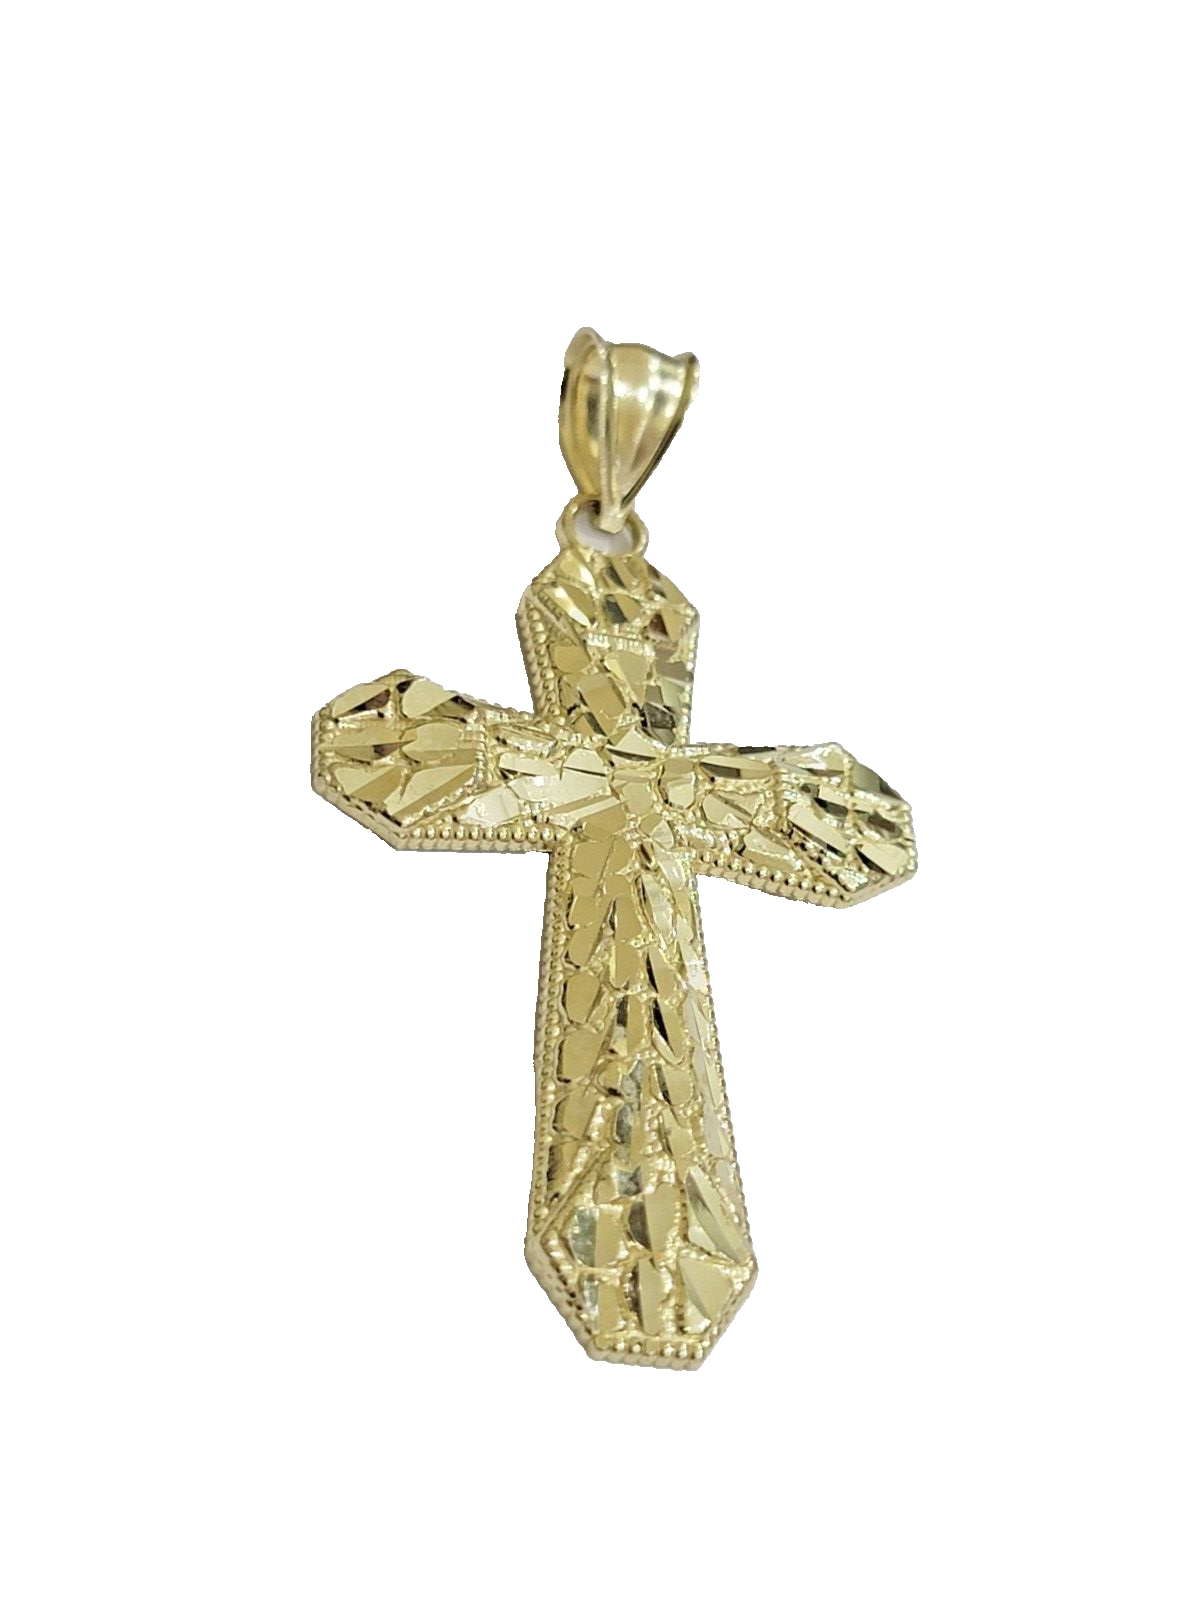 10k Yellow Gold Cross Charm Jesus Pendant 2'' Inch Necklace Chain Real 10kt SALE